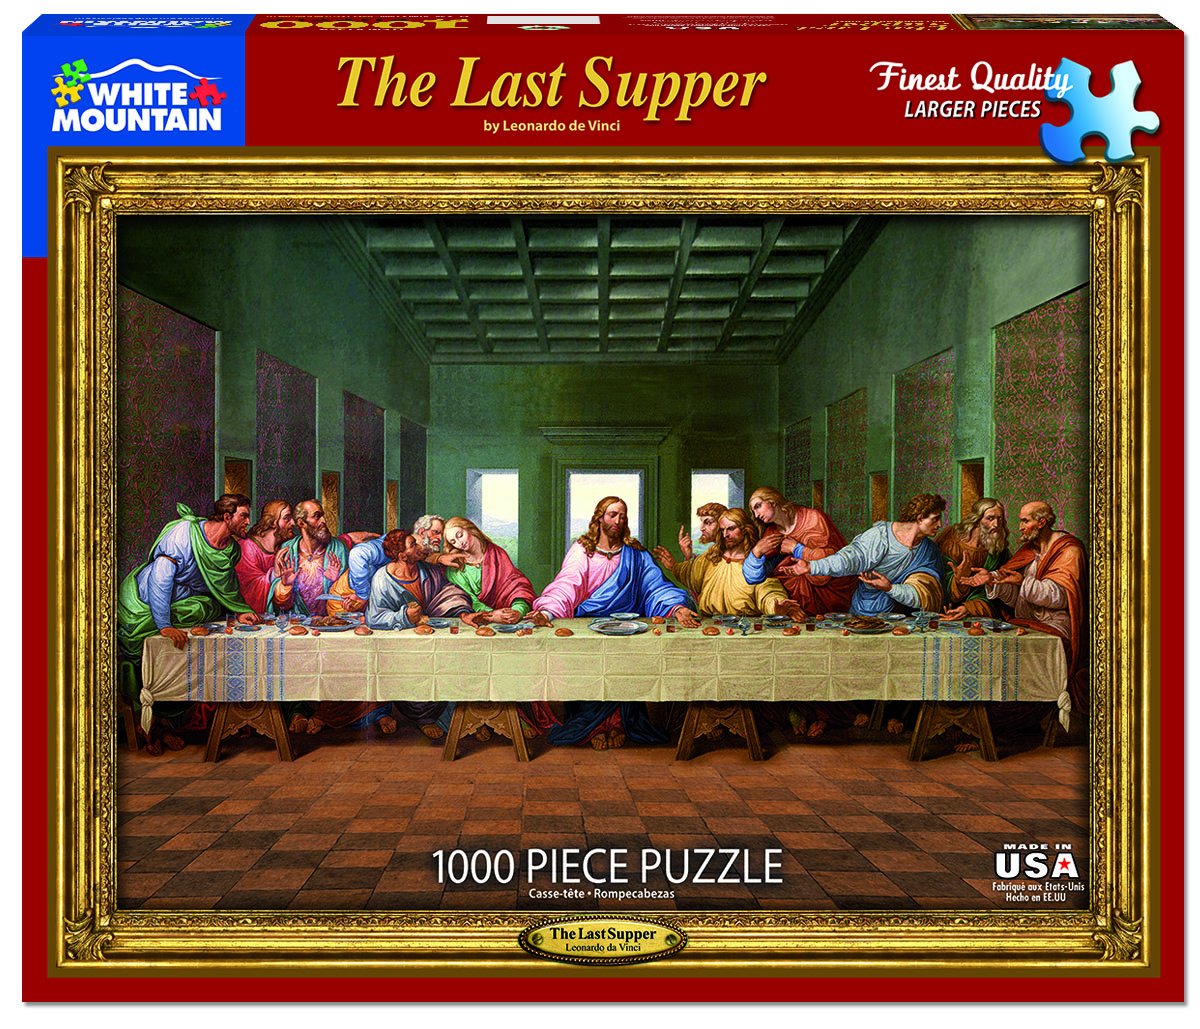 The Last Supper (1000 pc puzzle)